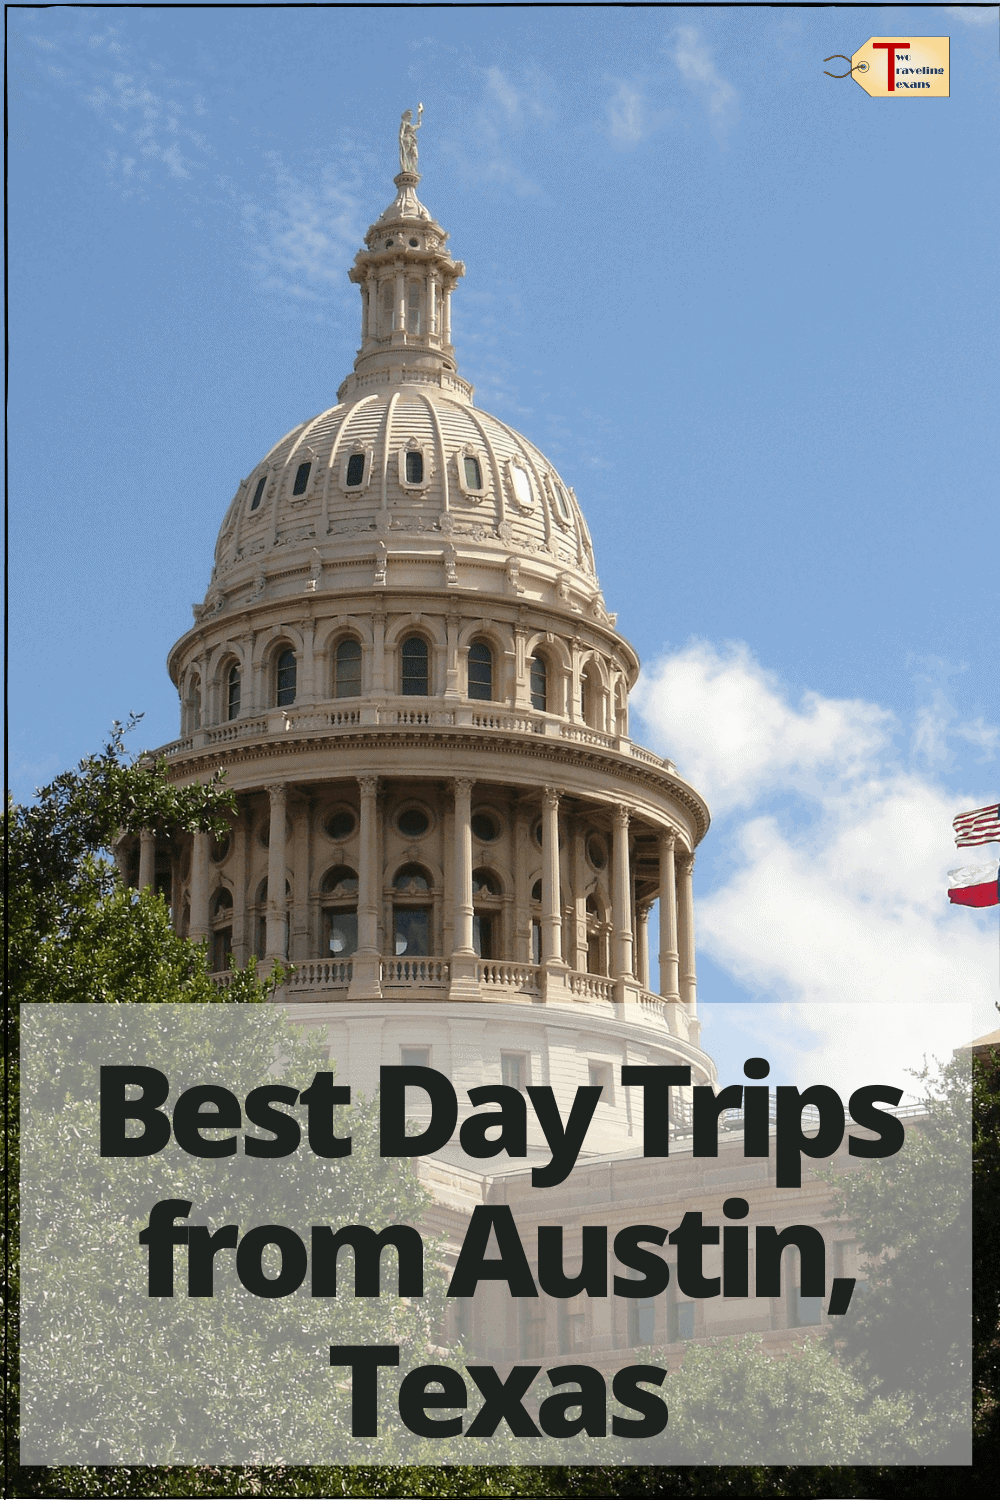 texas state capitol building with text overlay "best day trips from Austin, Texas"